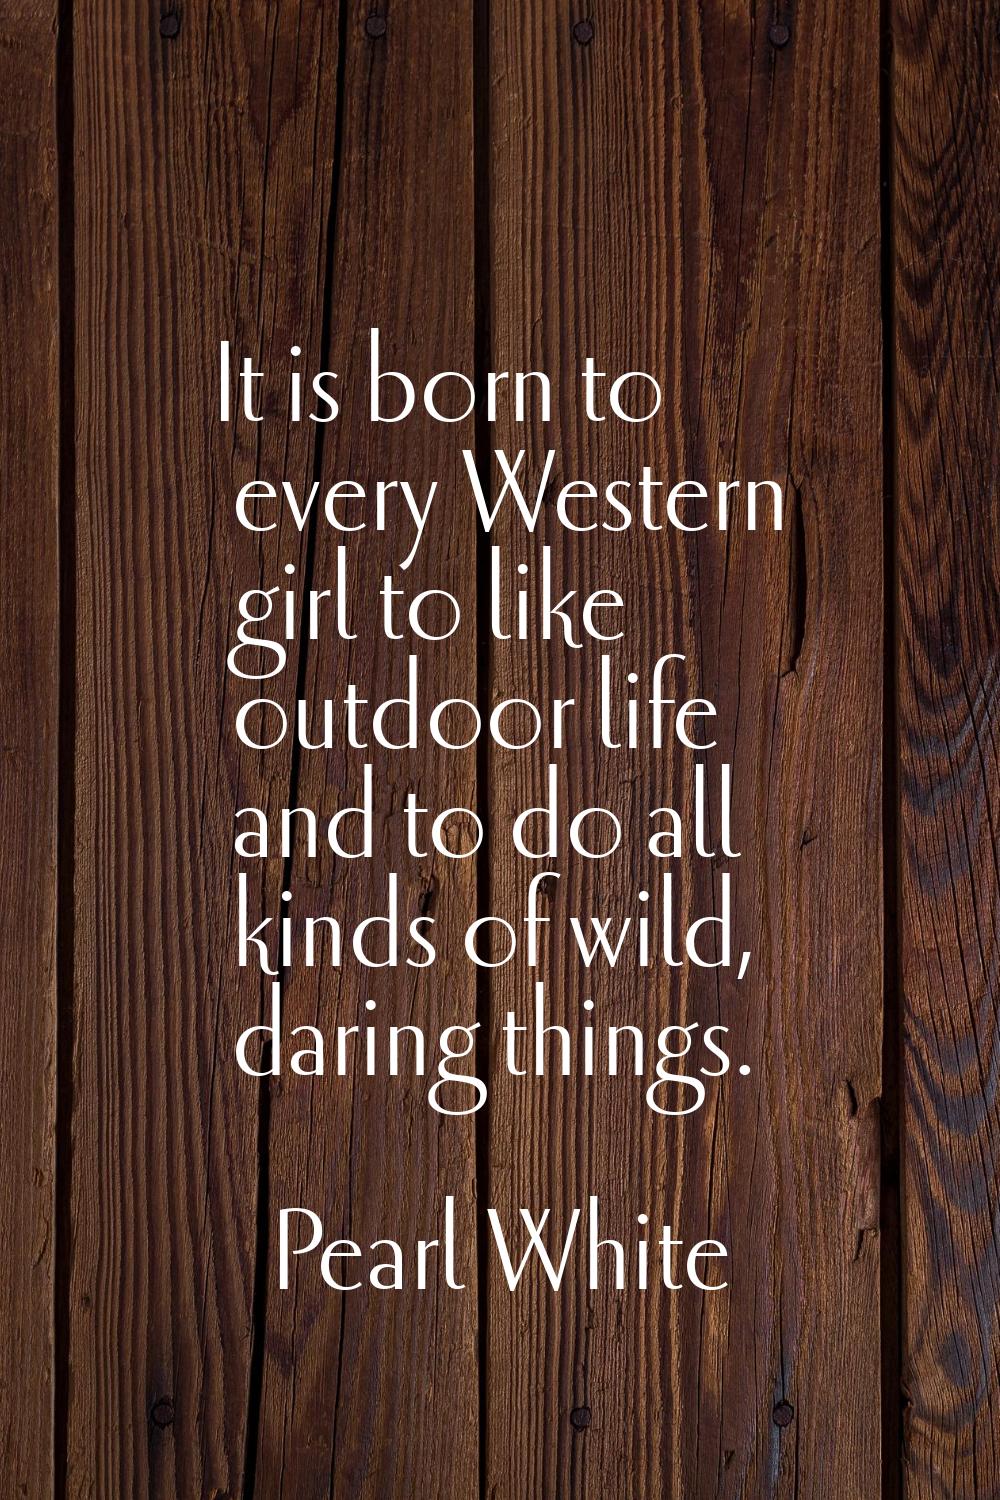 It is born to every Western girl to like outdoor life and to do all kinds of wild, daring things.